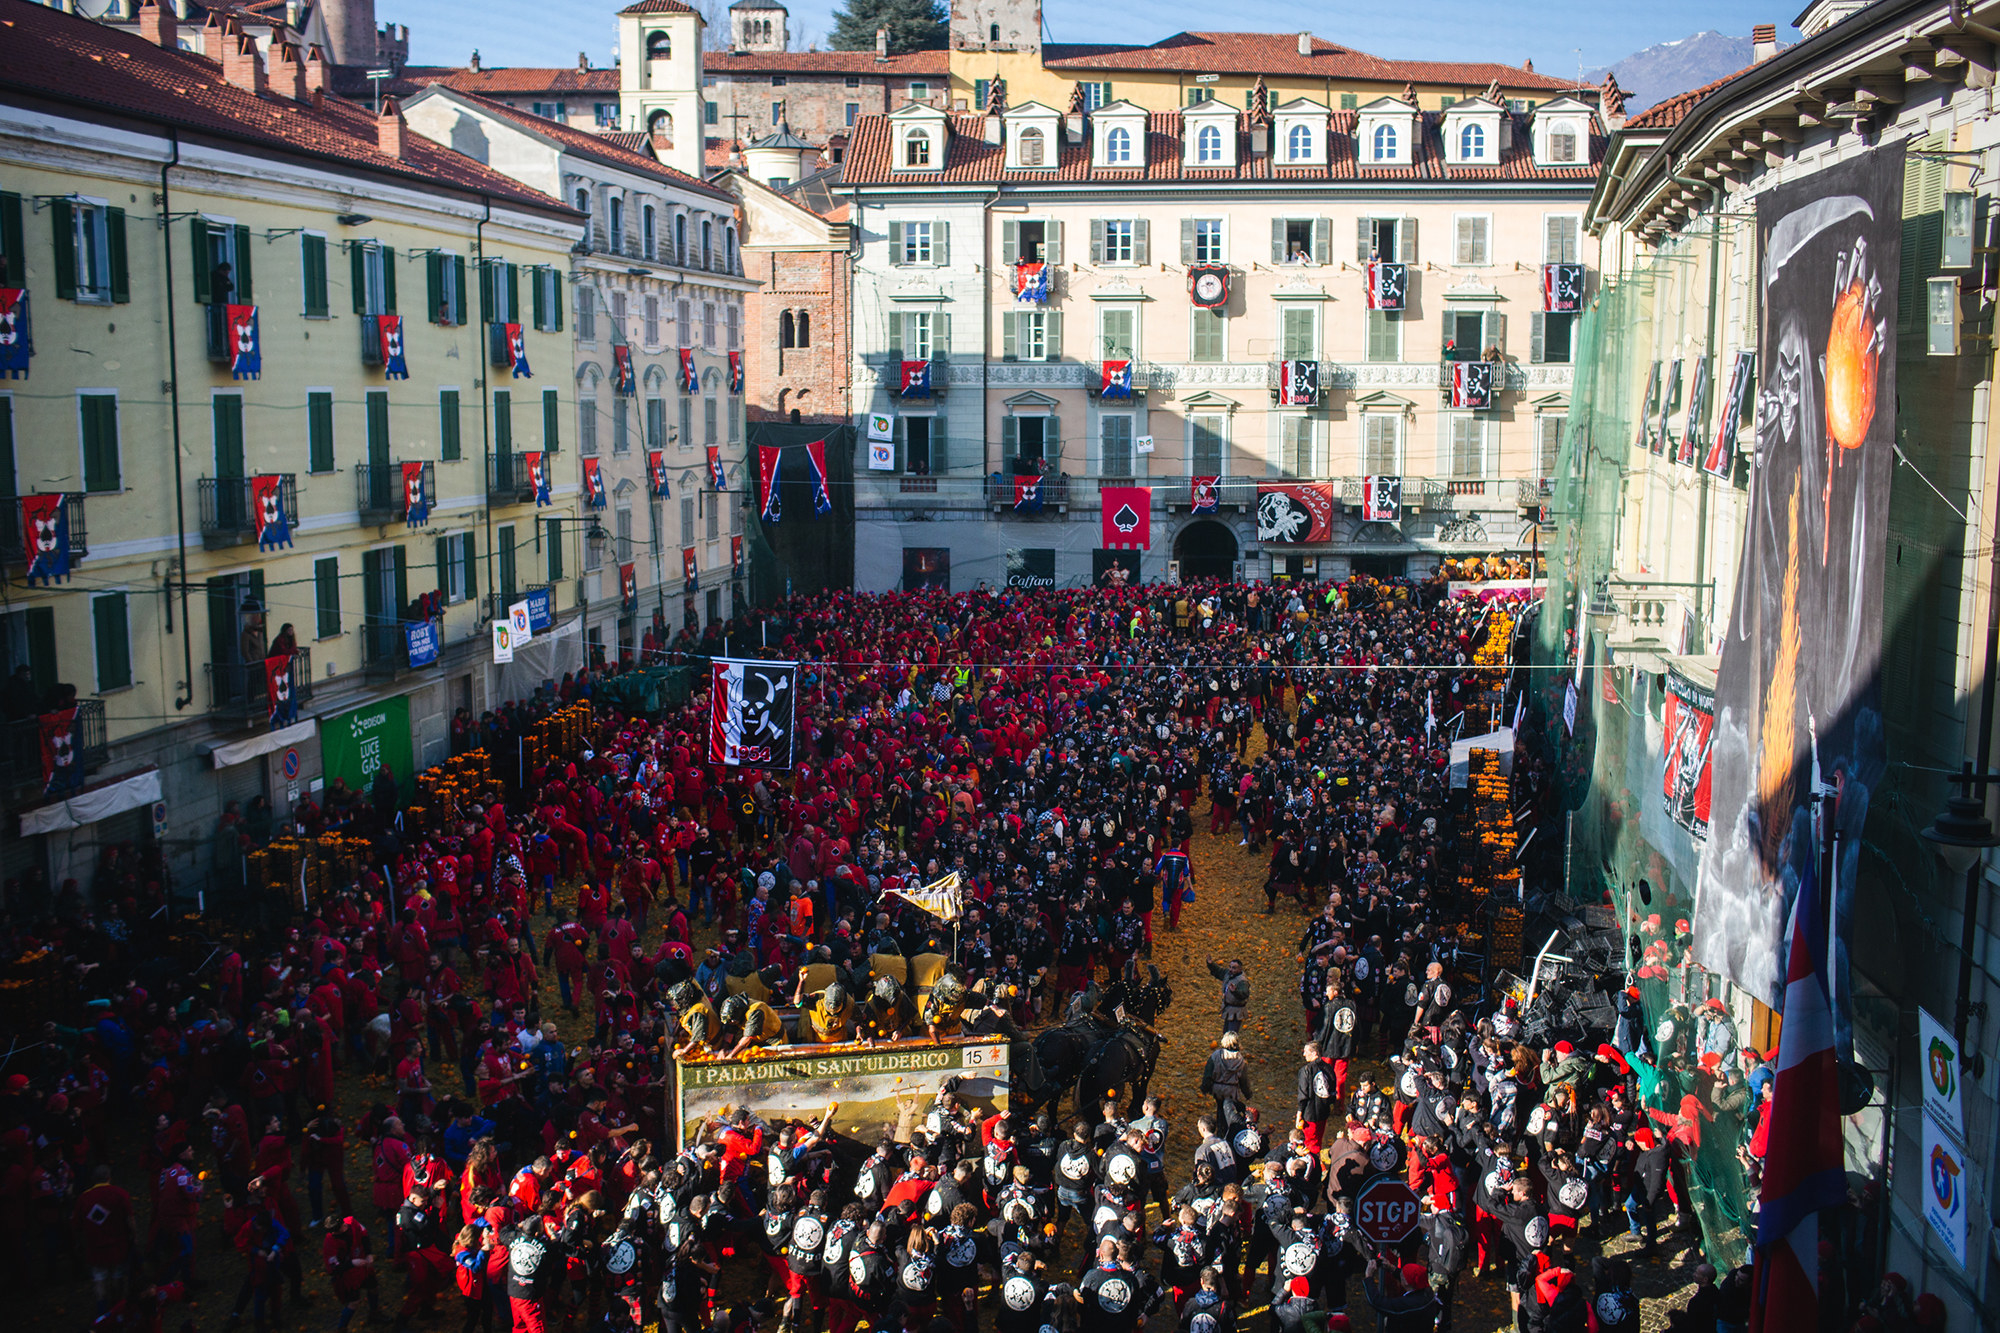 A public square is filled with people dressed in black and red medieval costumes.